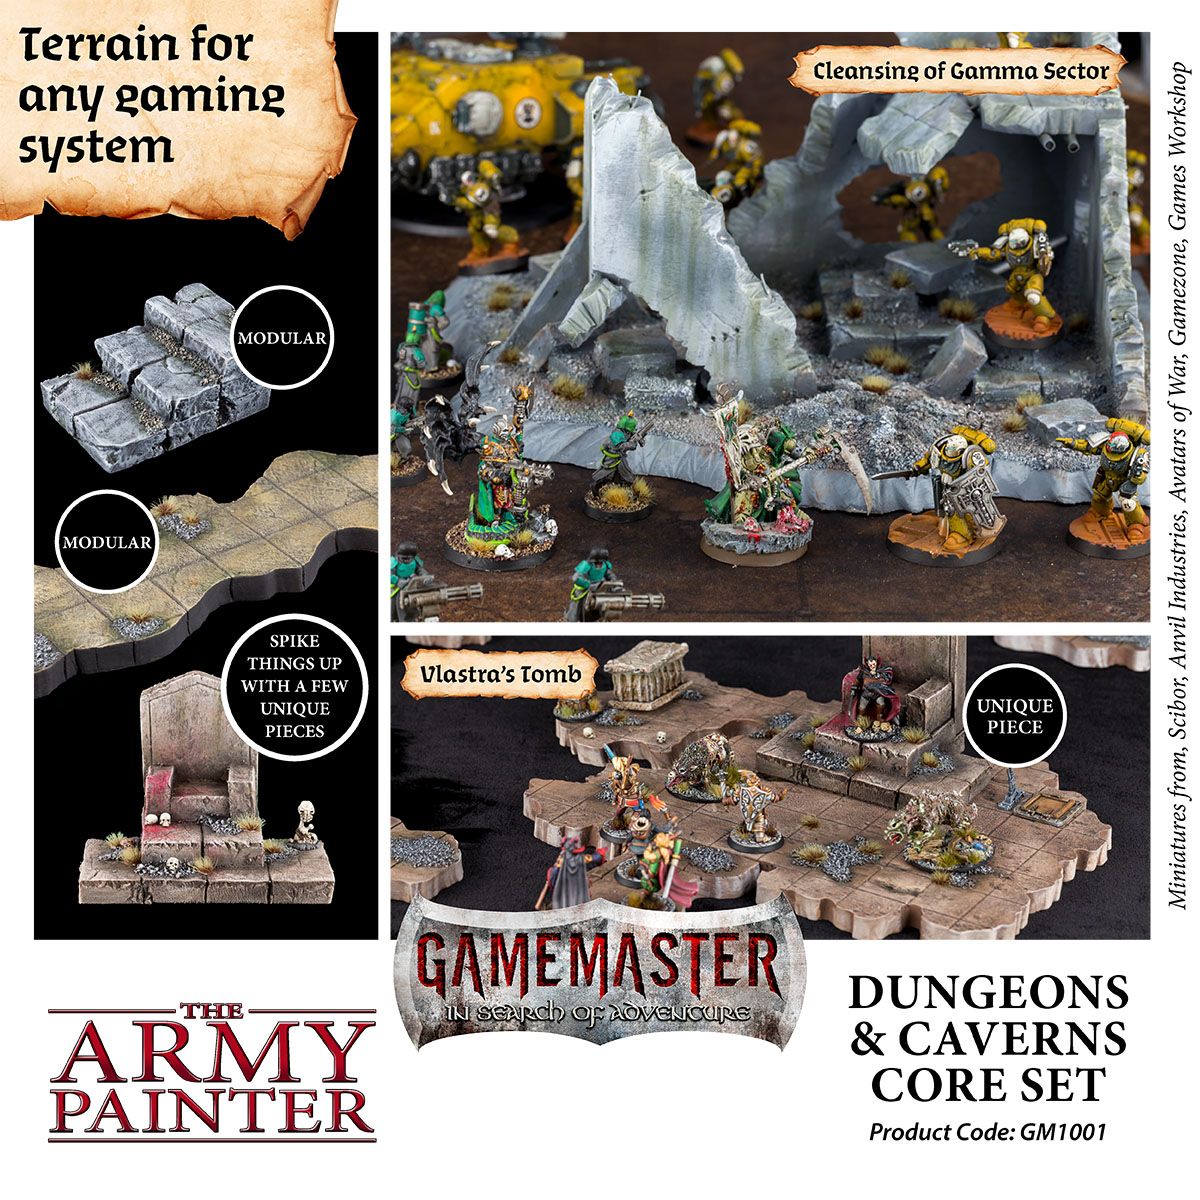 Gamemaster Dungeons & Caverns Core Set - Loaded Dice